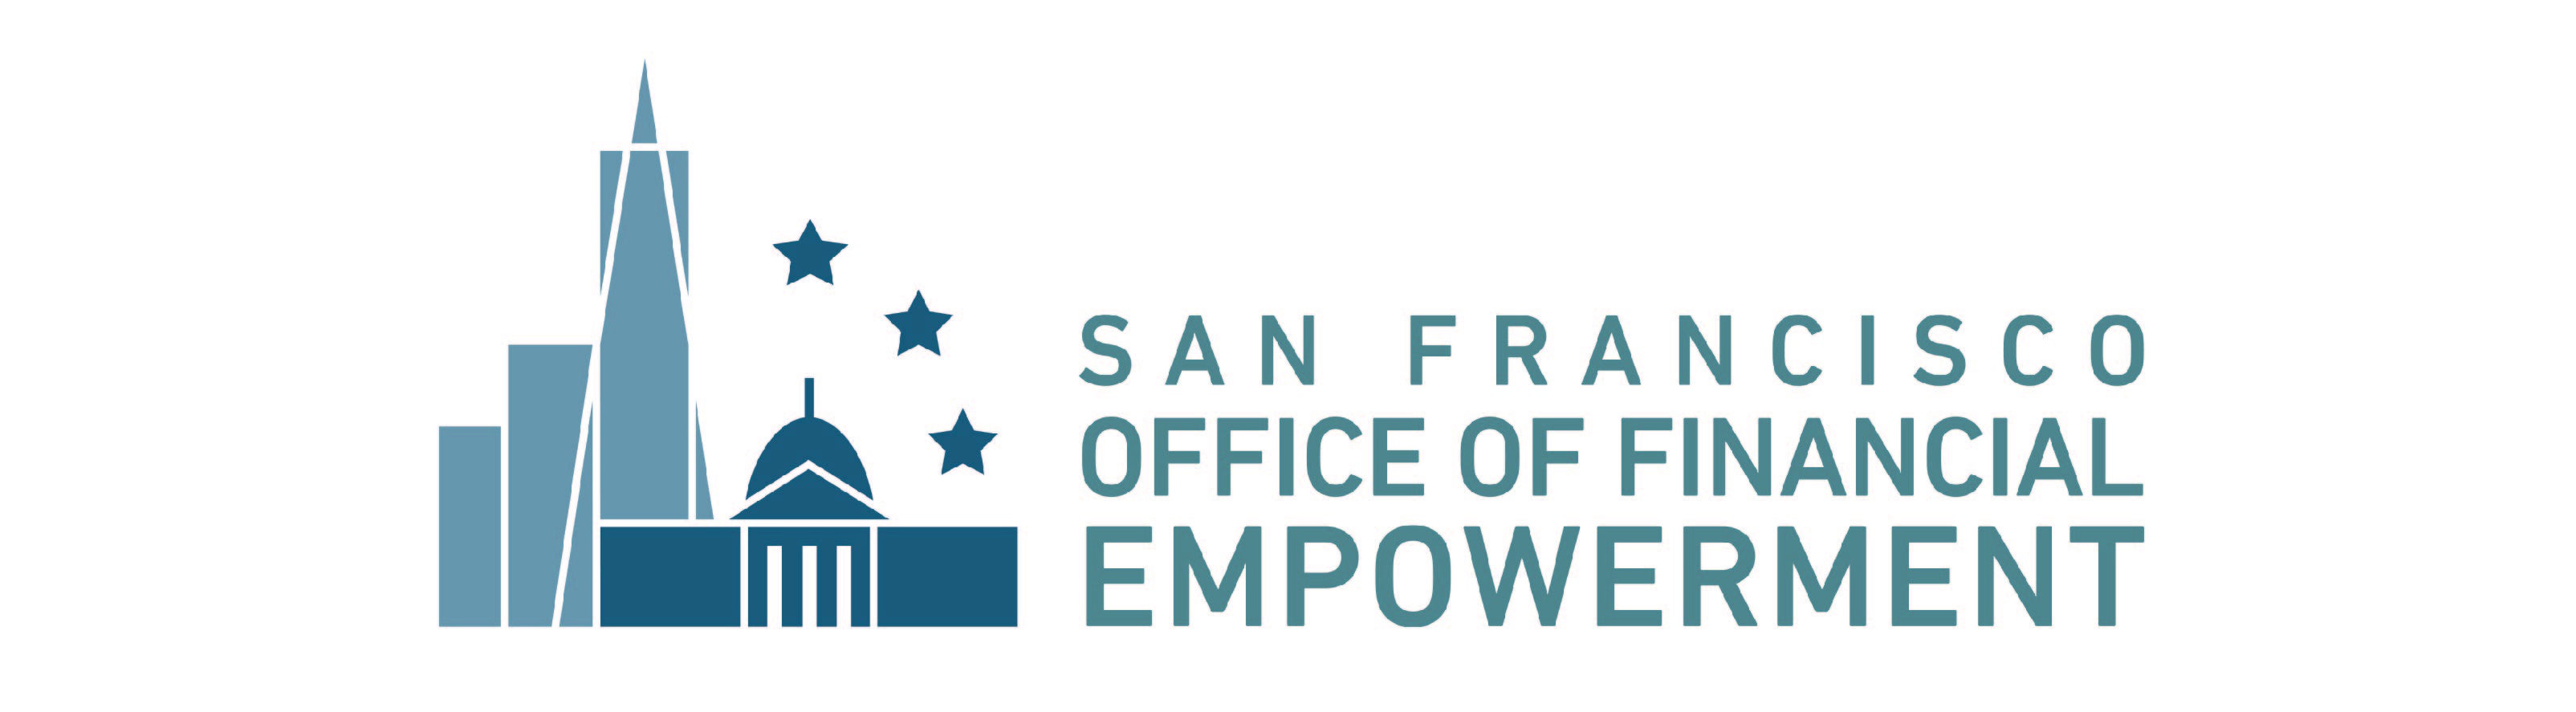 San Francisco Office Of Financial Empowerment 